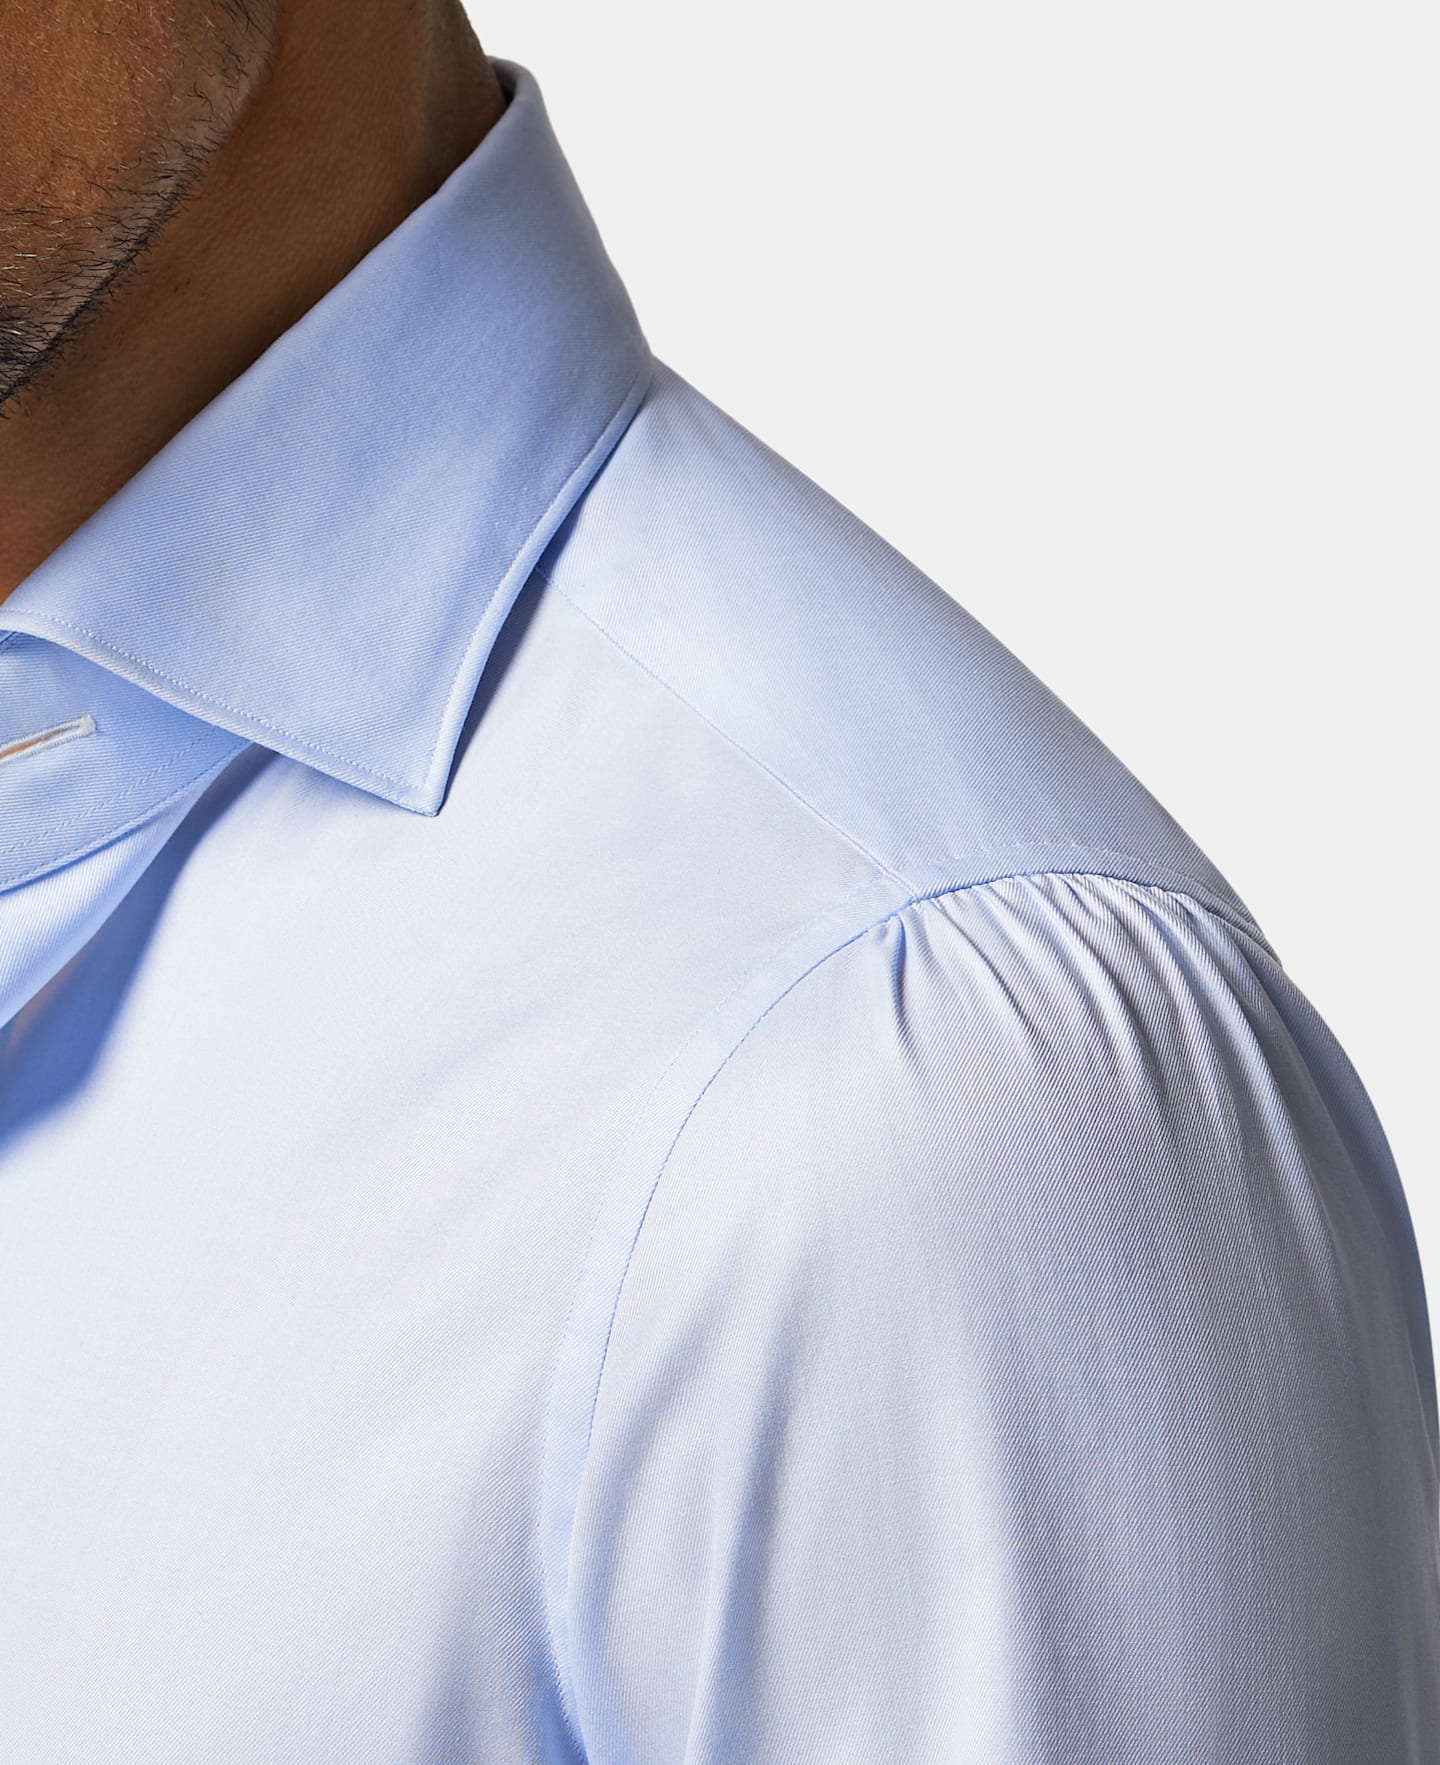 The Hallmarks of a Quality Shirt